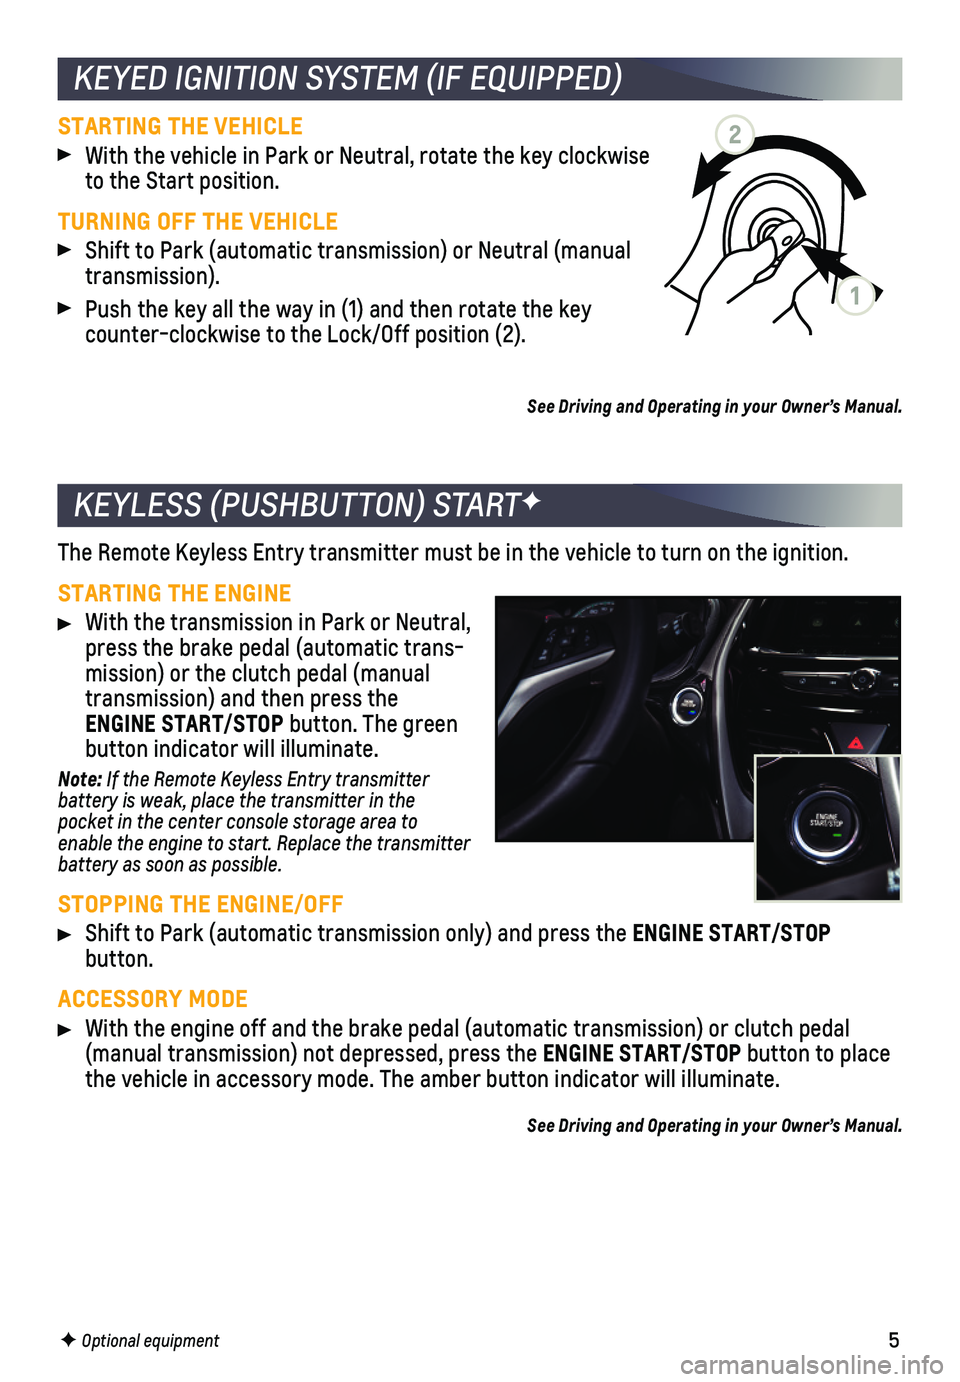 CHEVROLET SPARK 2020  Get To Know Guide 5
KEYLESS (PUSHBUTTON) STARTF
The Remote Keyless Entry transmitter must be in the vehicle to turn on t\
he ignition.
STARTING THE ENGINE
 With the transmission in Park or Neutral, press the brake peda